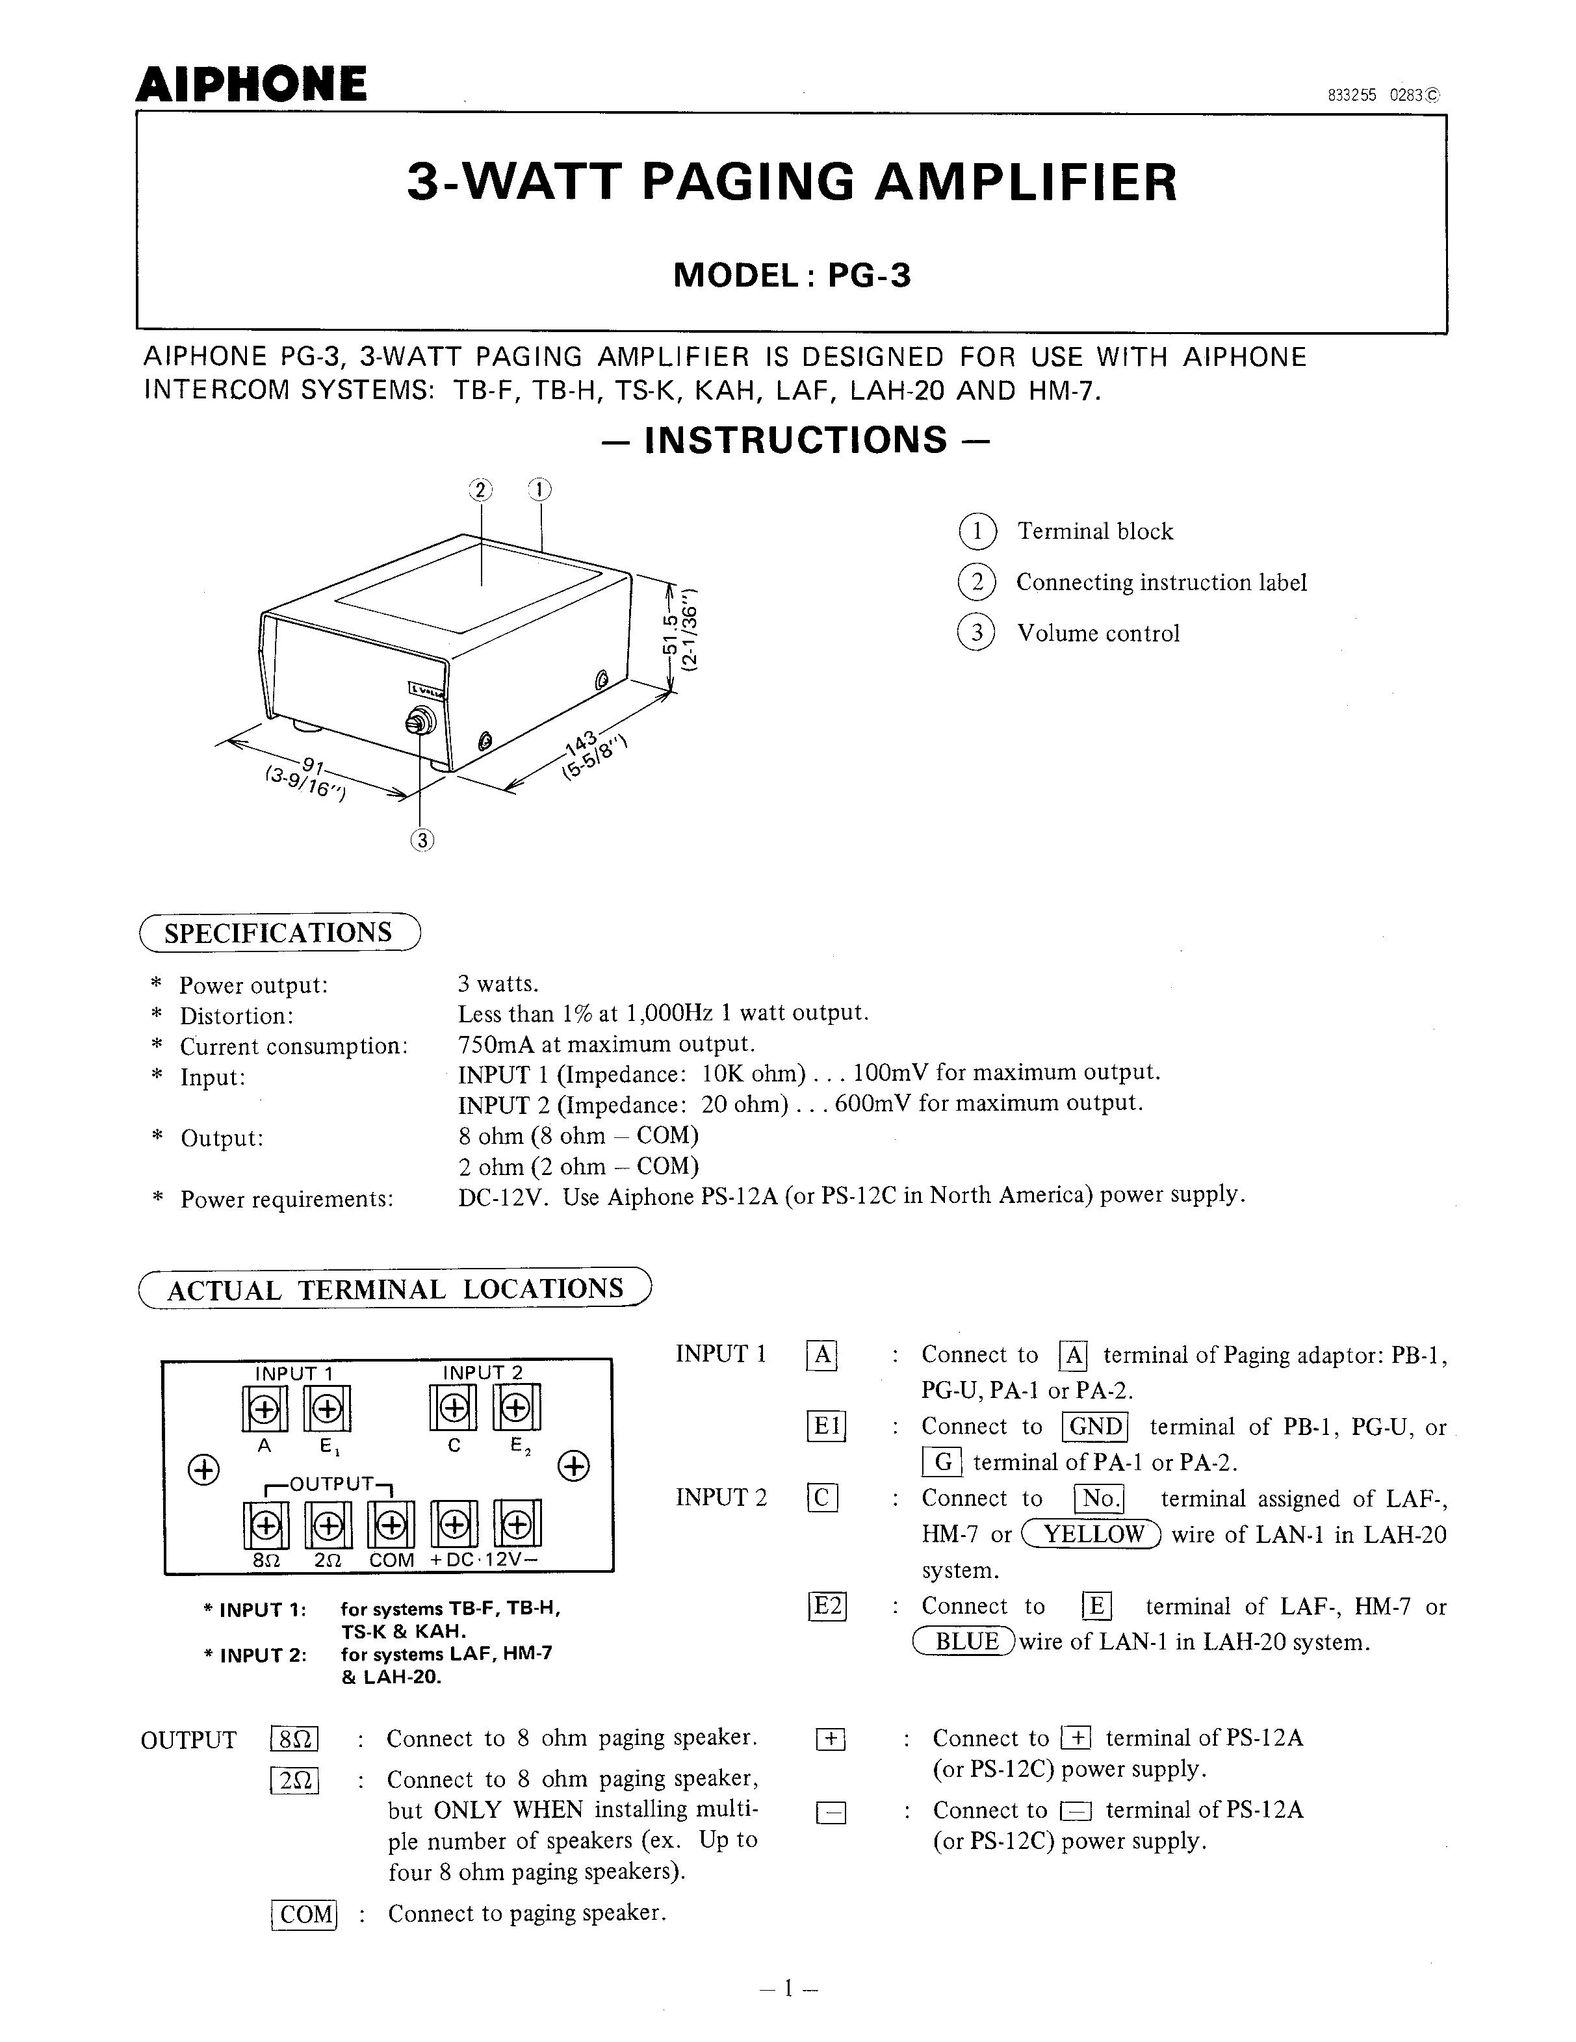 Aiphone PG-3 Stereo Amplifier User Manual